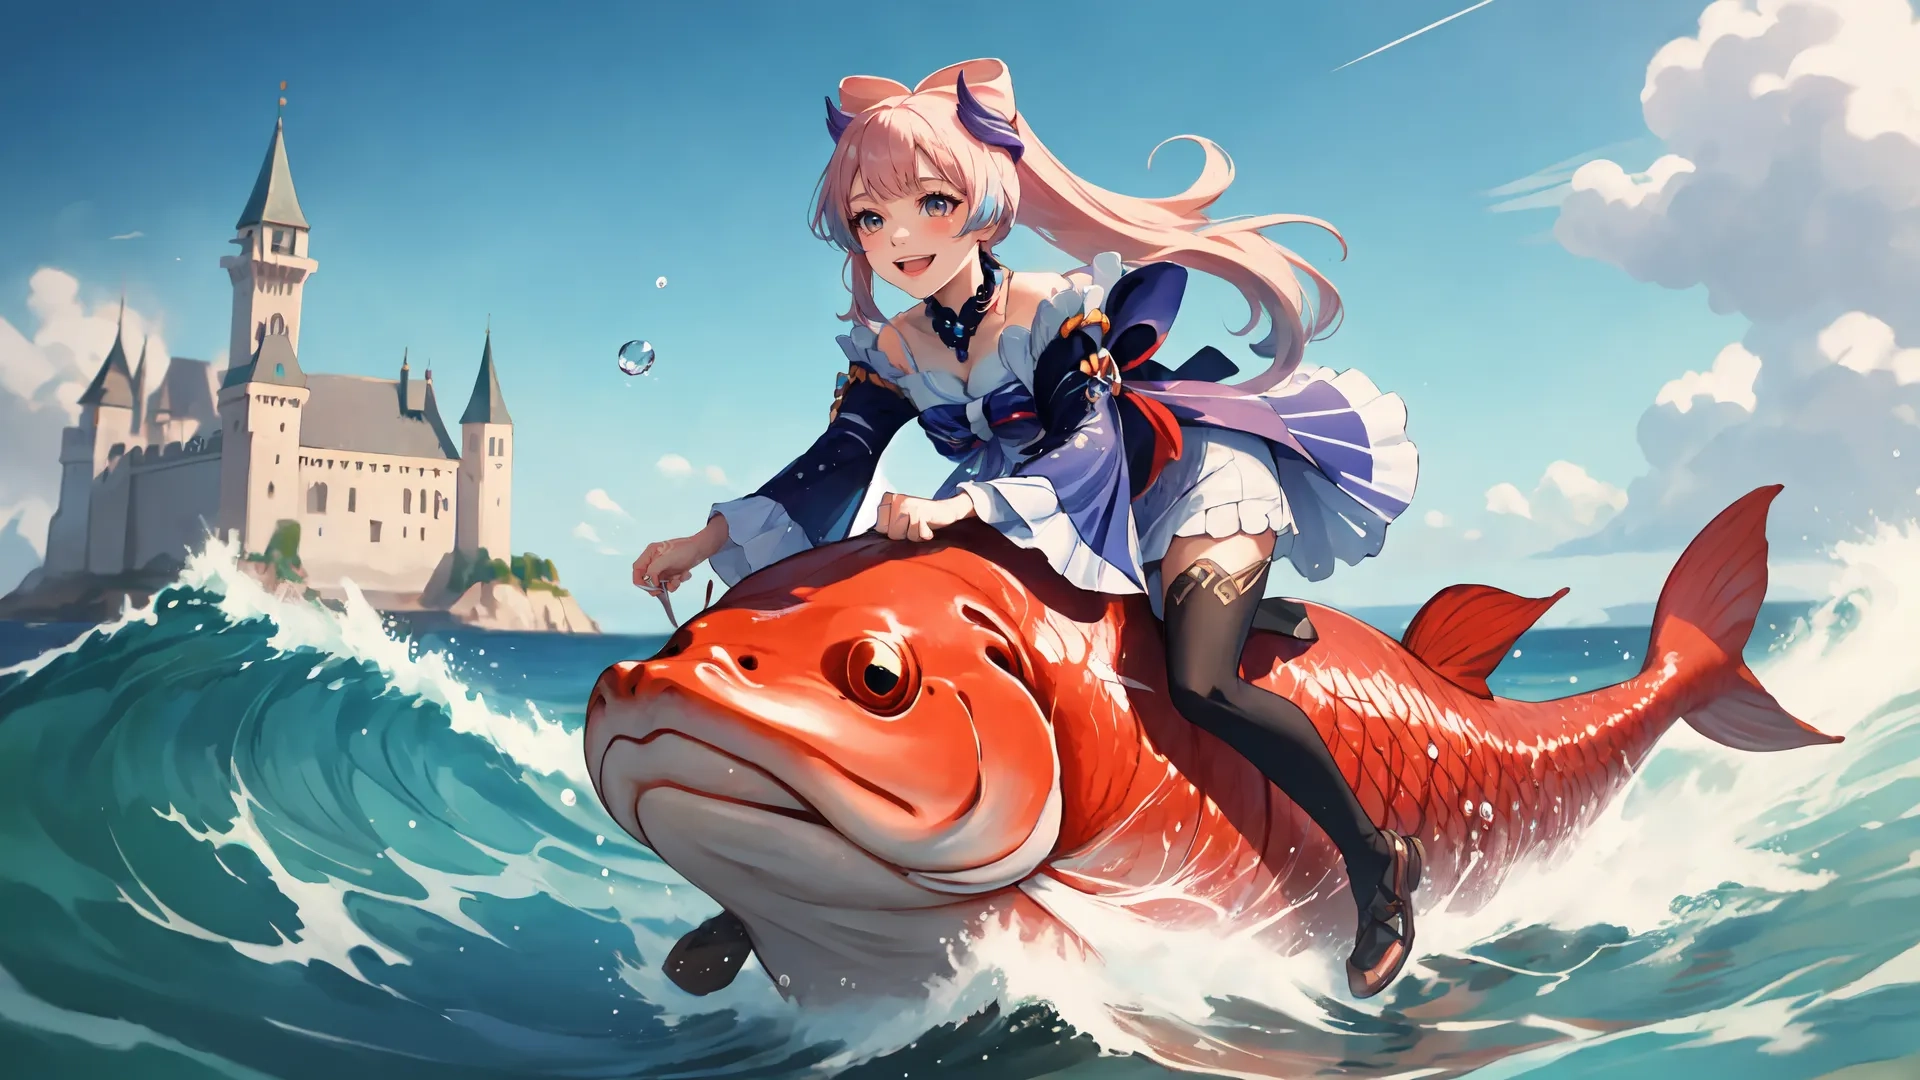 there is an art illustration i done of someone riding a fish in the water by itself with a castle on the background and clouds on that appear to be in the sky
